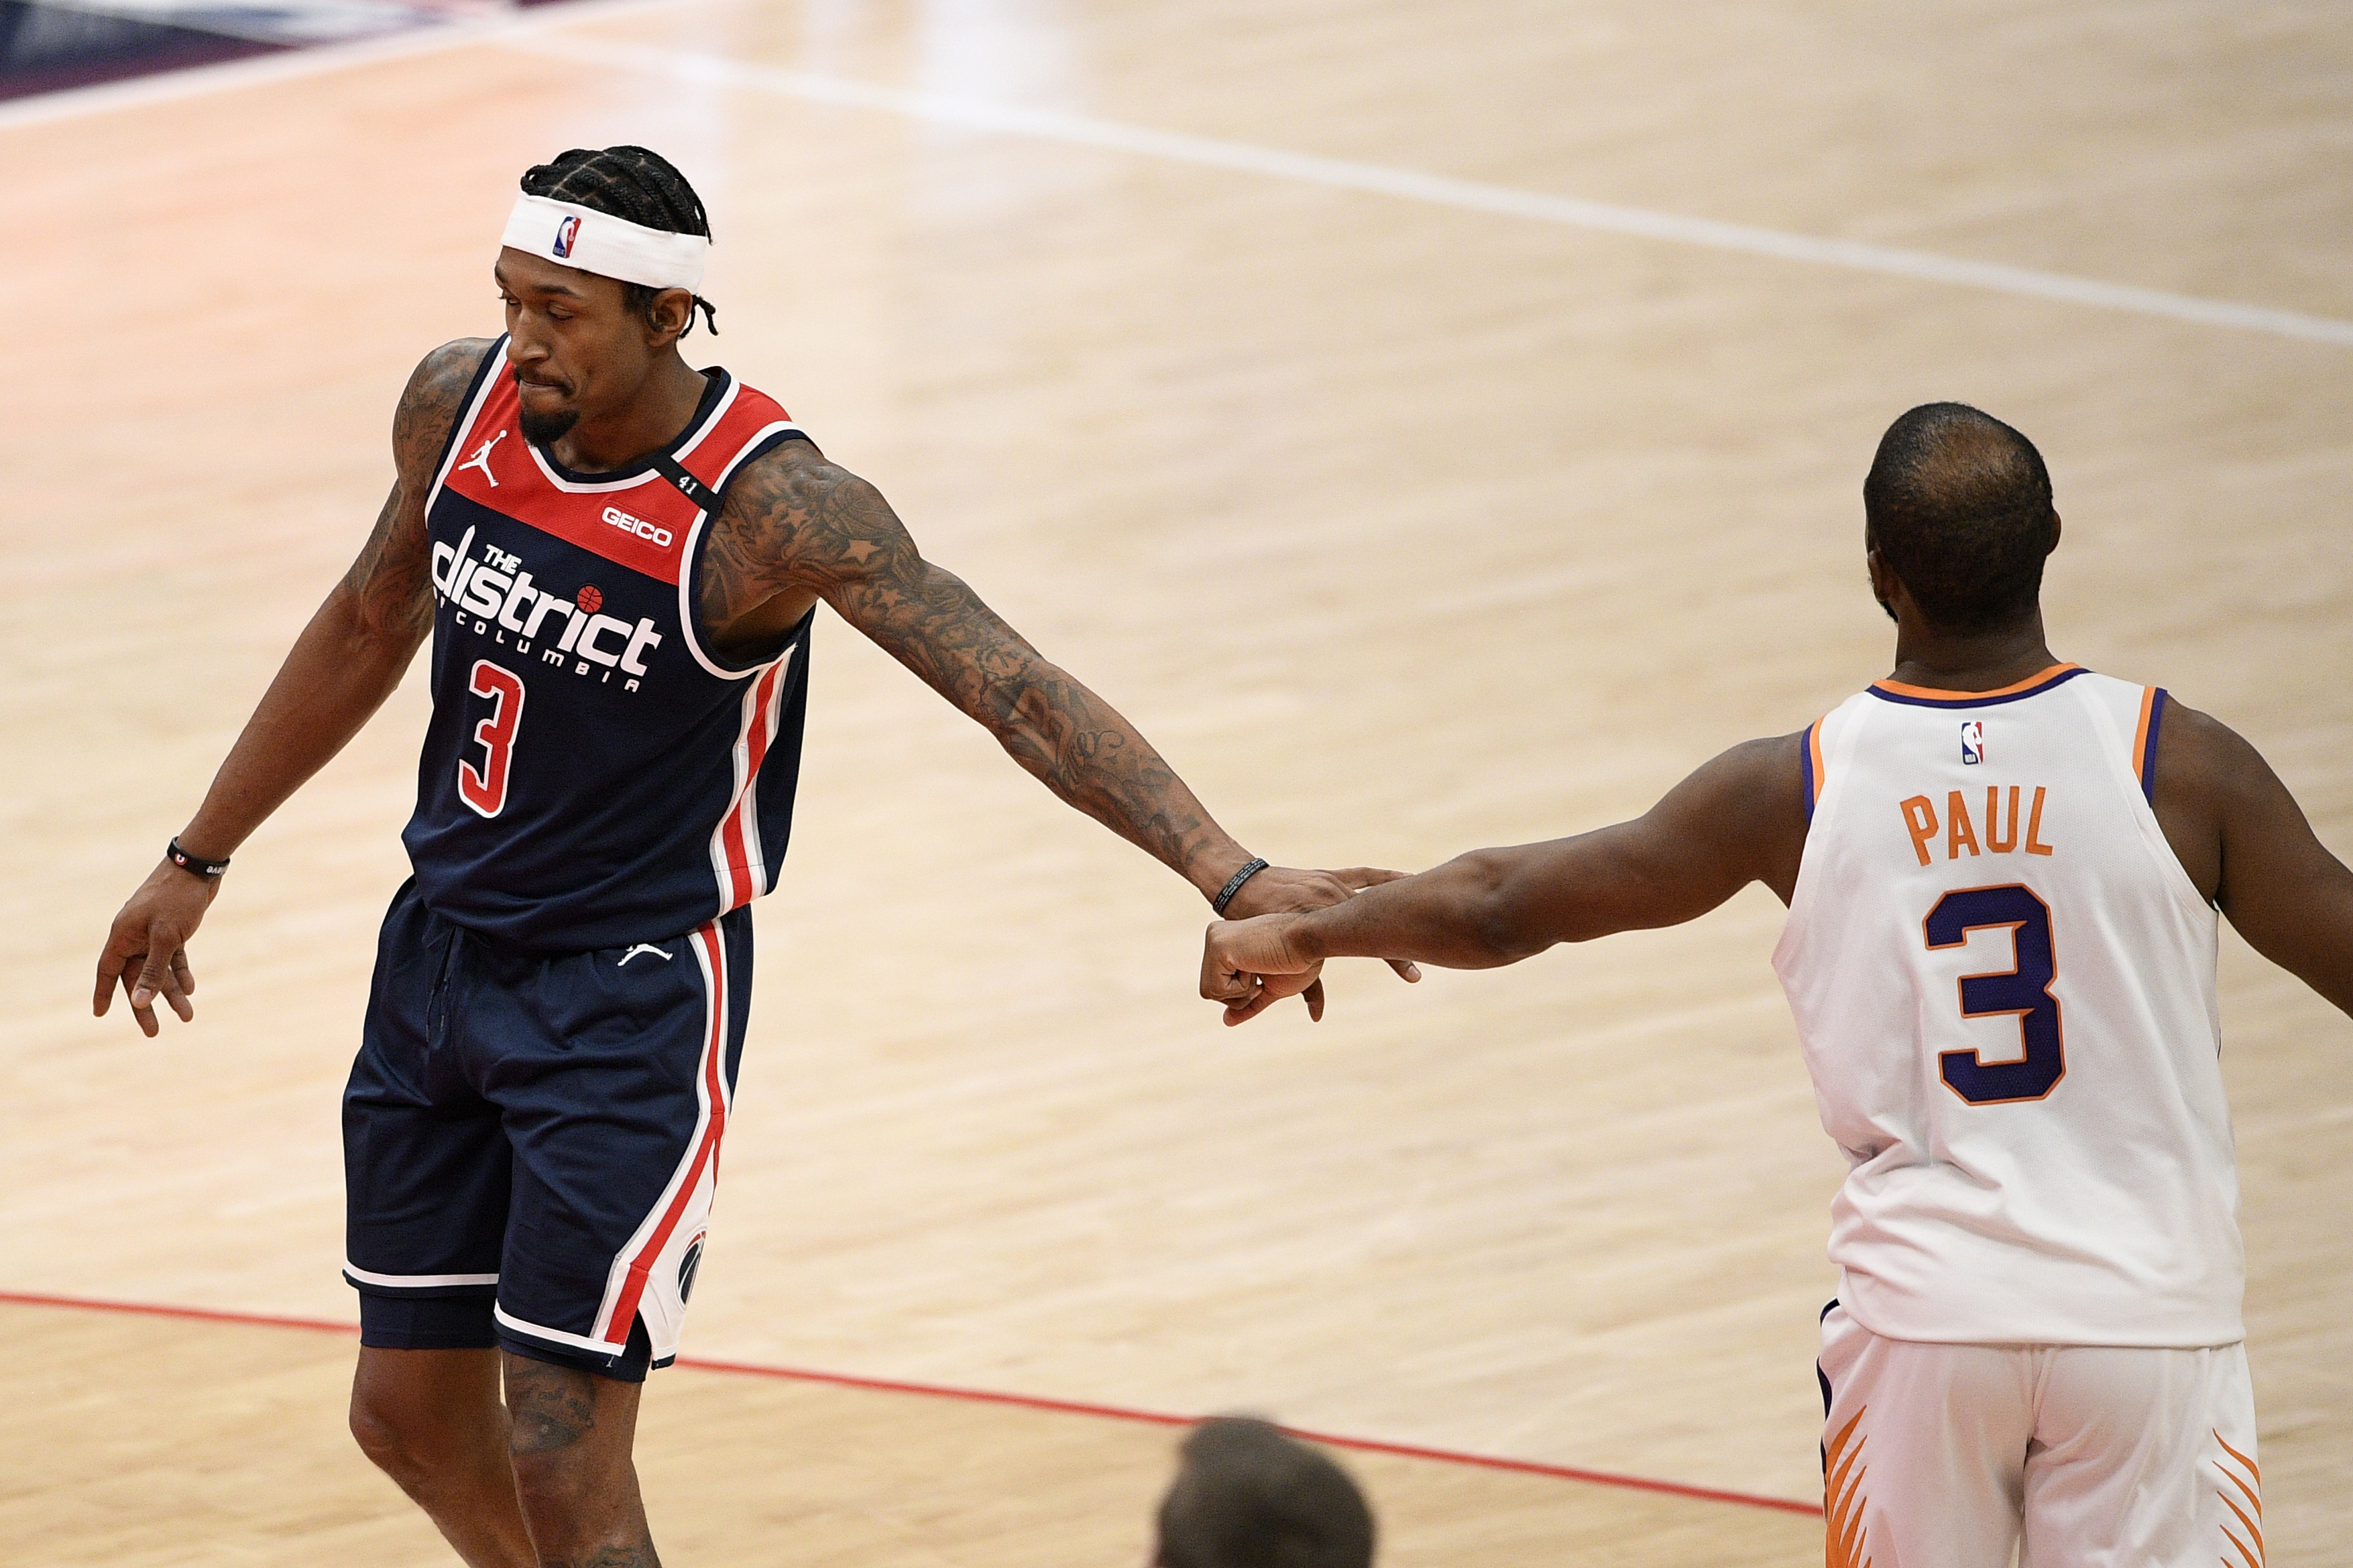 Expect Suns Big 3 of Kevin Durant-Devin Booker-Bradley Beal to win